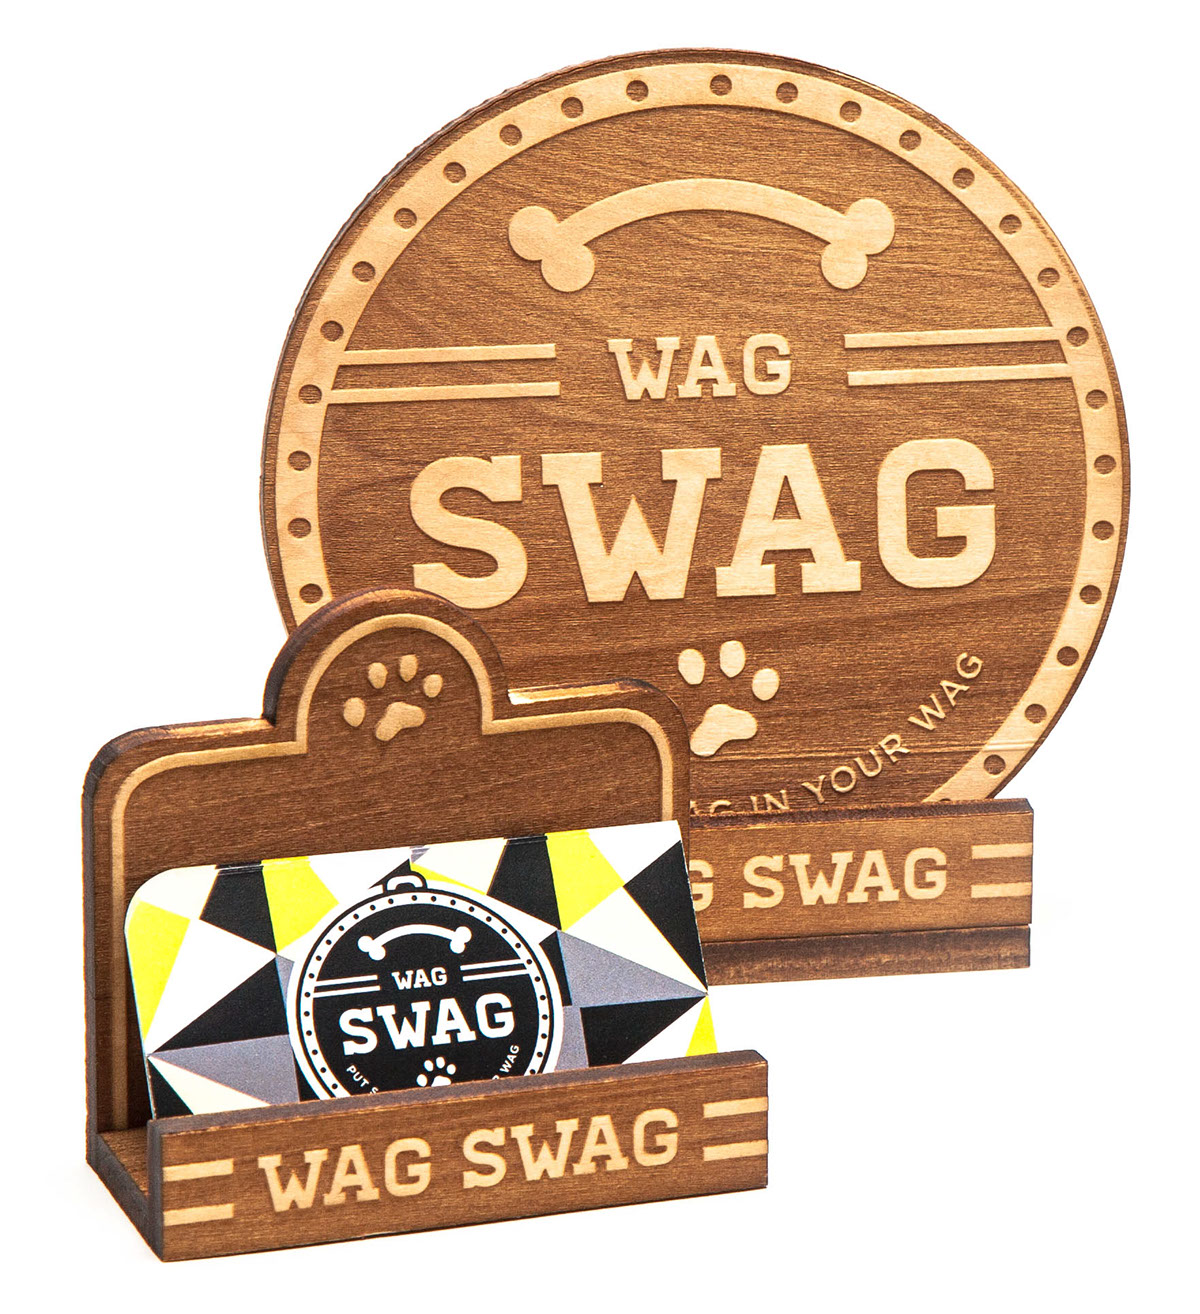 wag swag pet packaging leash tad carpenter KU swaggy waggy design wood box laser cut brand board brand story support art pets dog